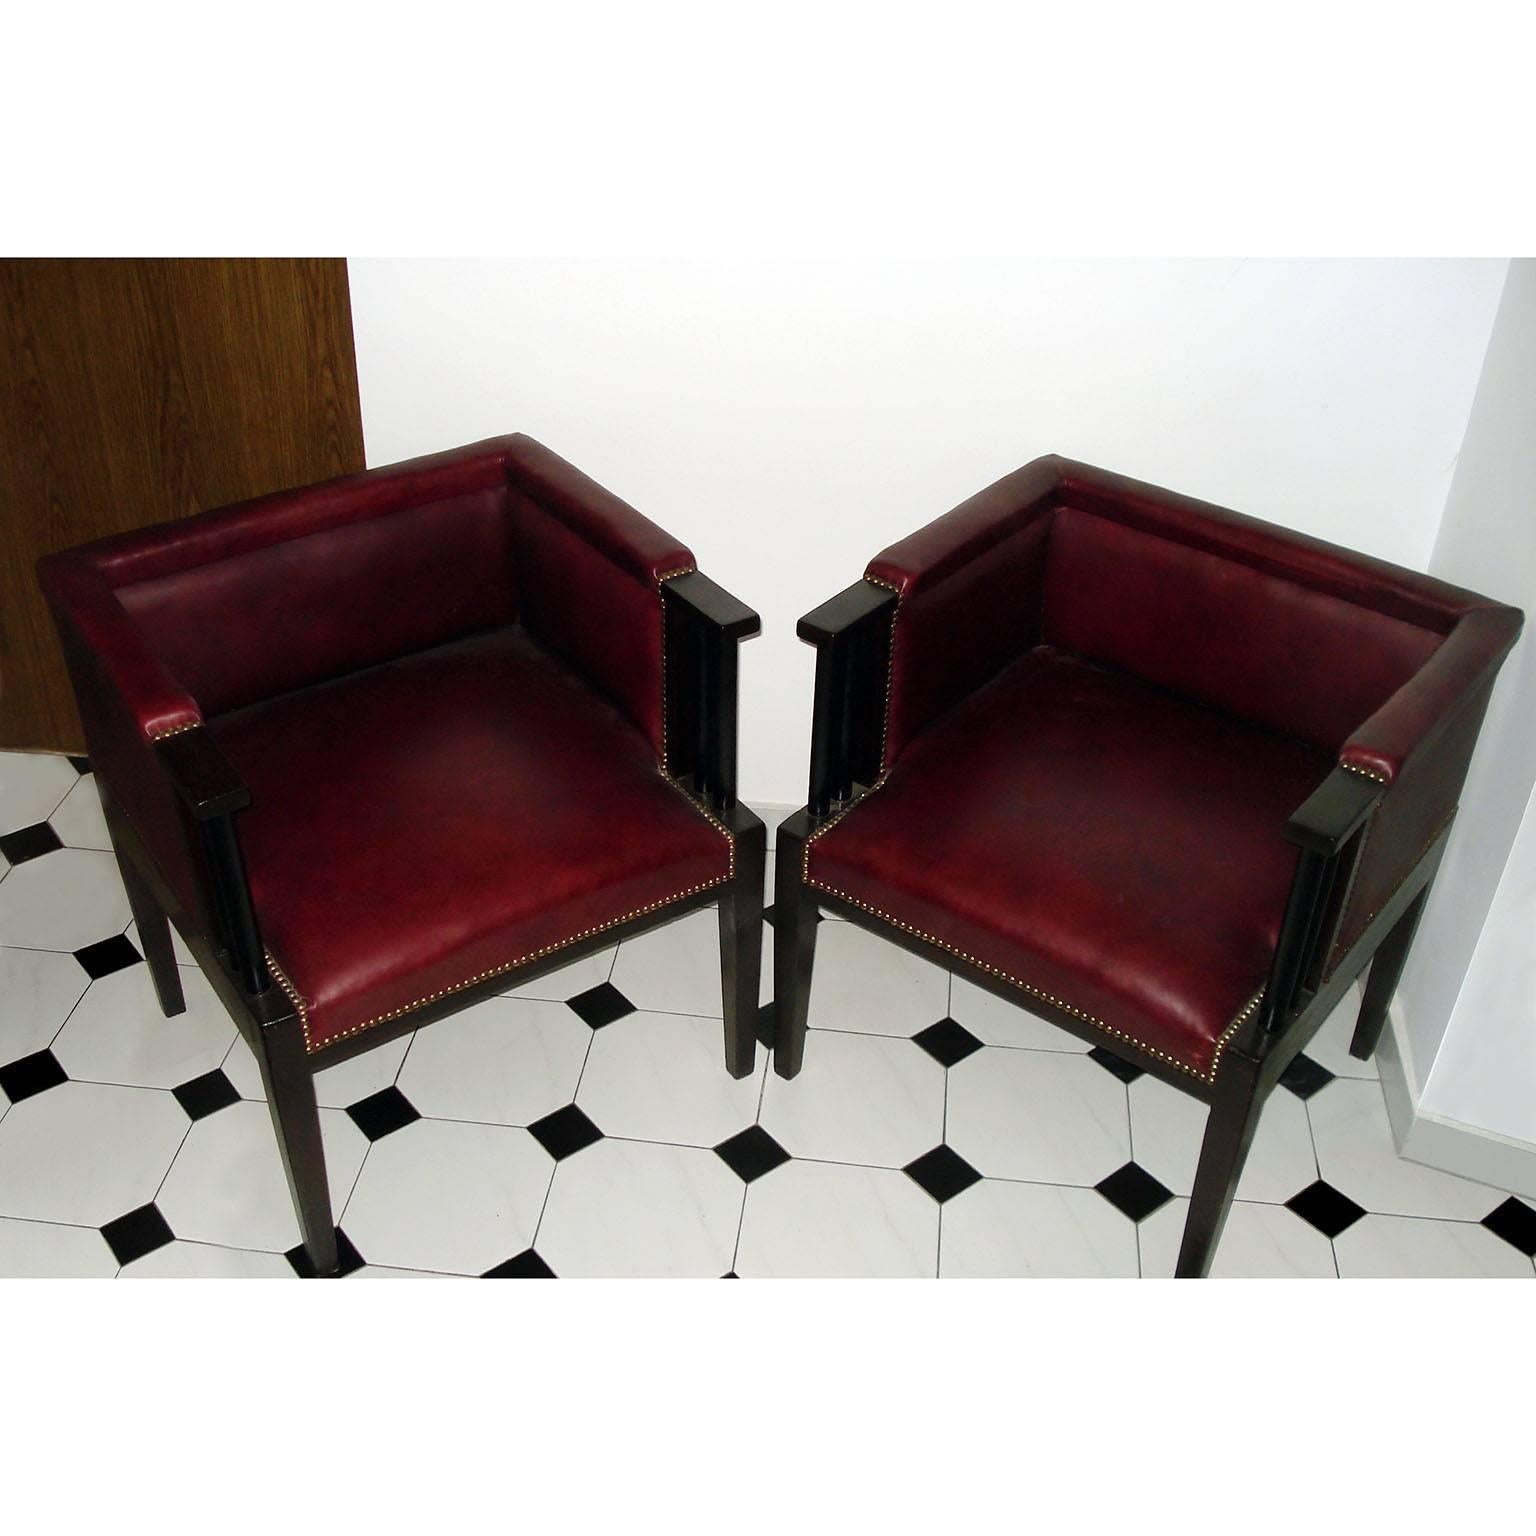 Bauhaus Rare Pair of Constructivist Armchairs in the Style of Darmstadt Artists Colony